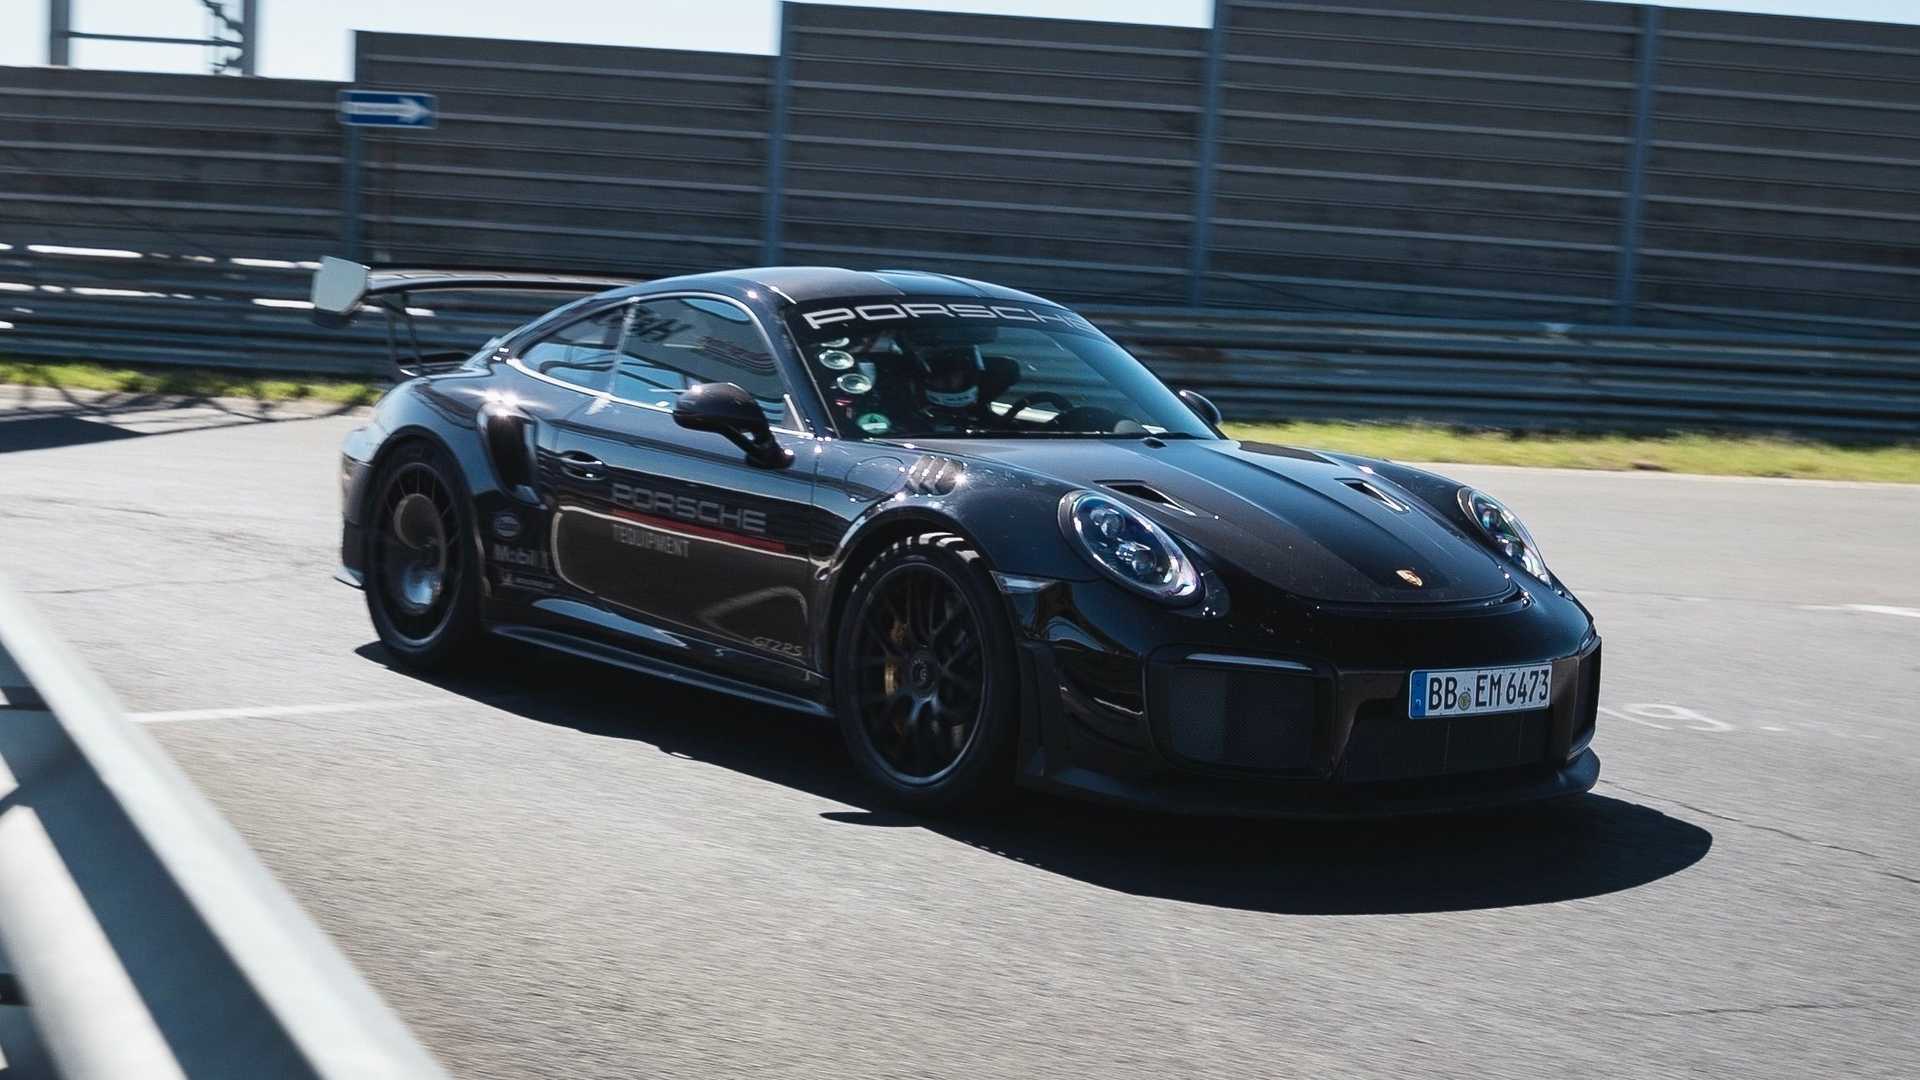 Porsche-911-GT2-RS-Manthey-Performance-Kit-Nurburgring-Record-25